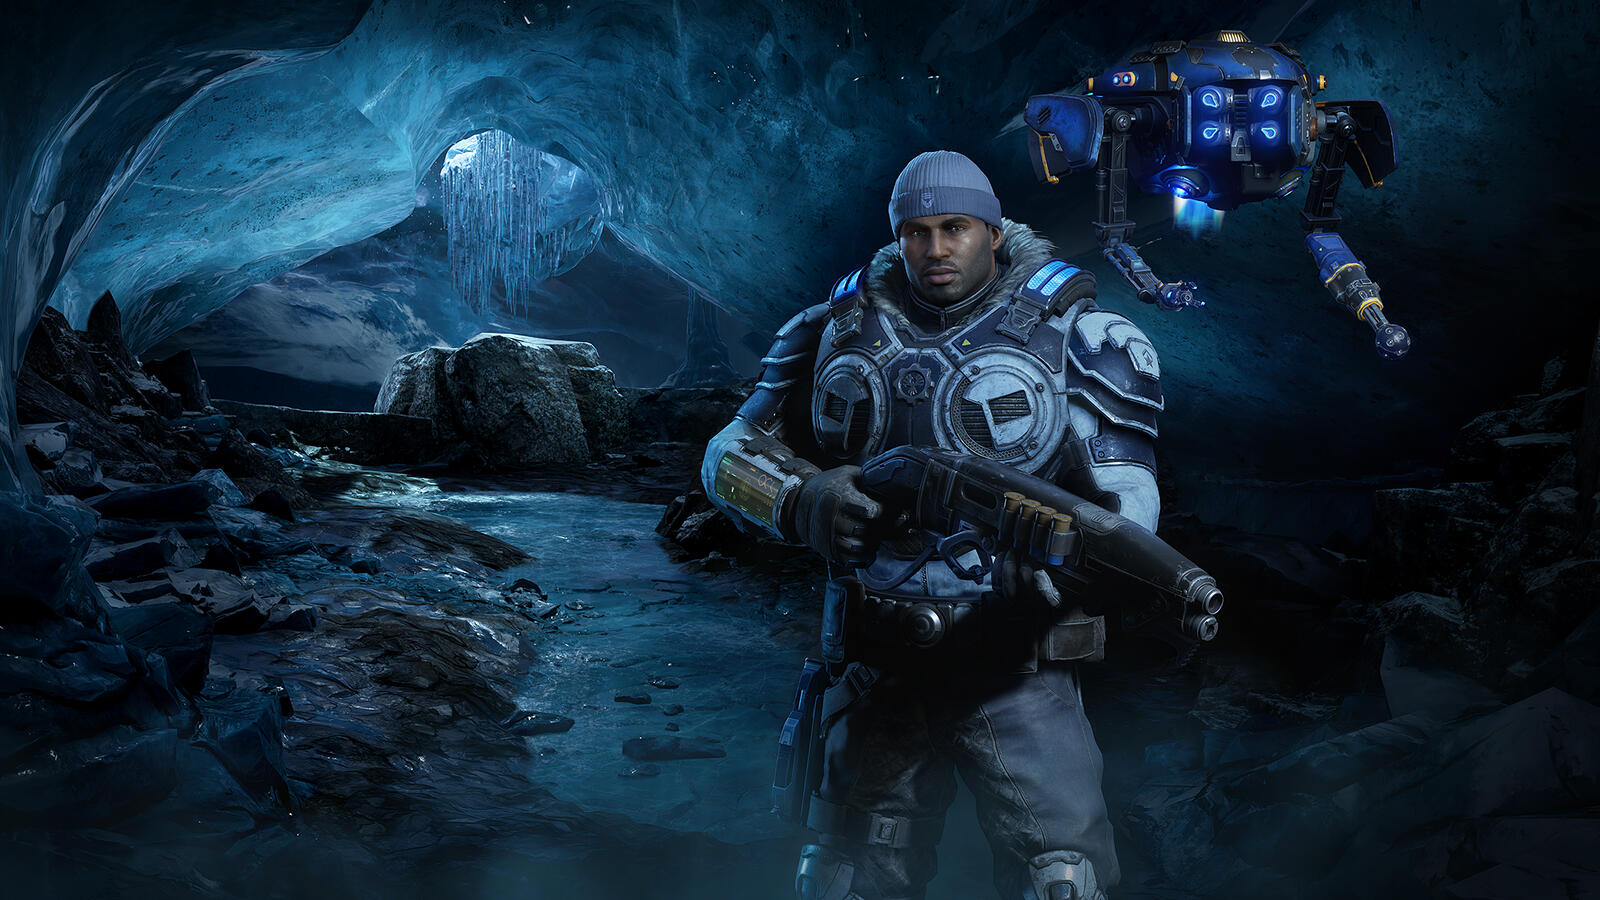 Free photo The soldier with the machine gun from Gears 5.